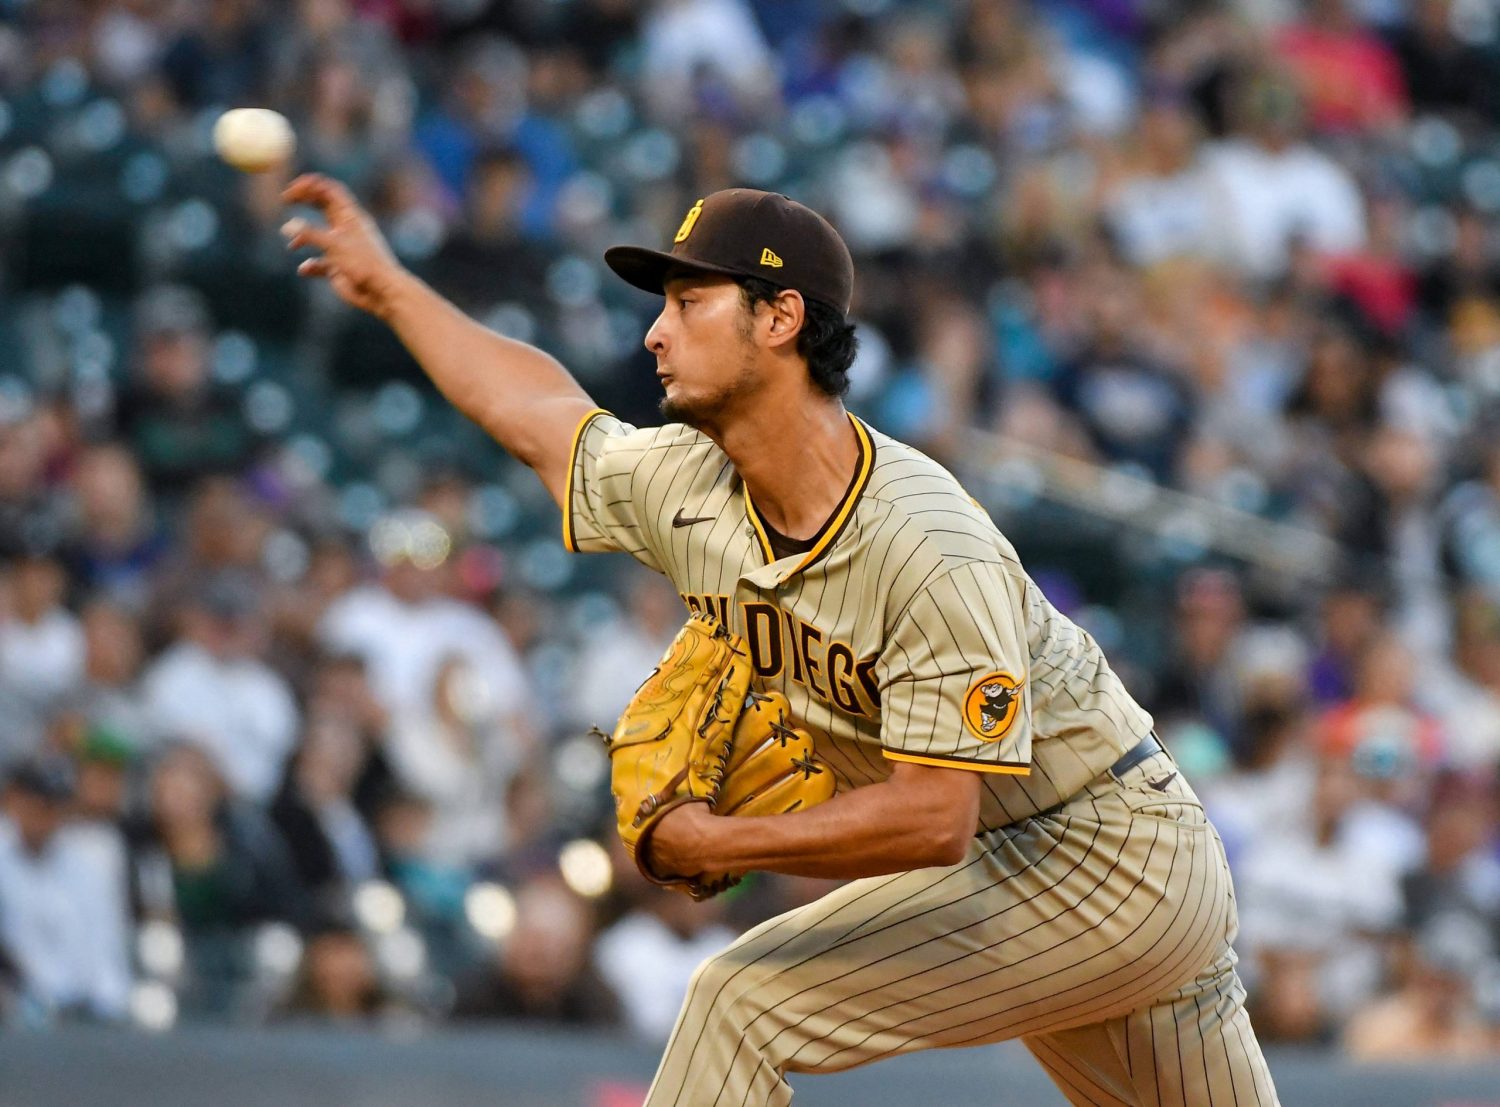 Getting the best of Yu: Can Padres' Darvish find what he's